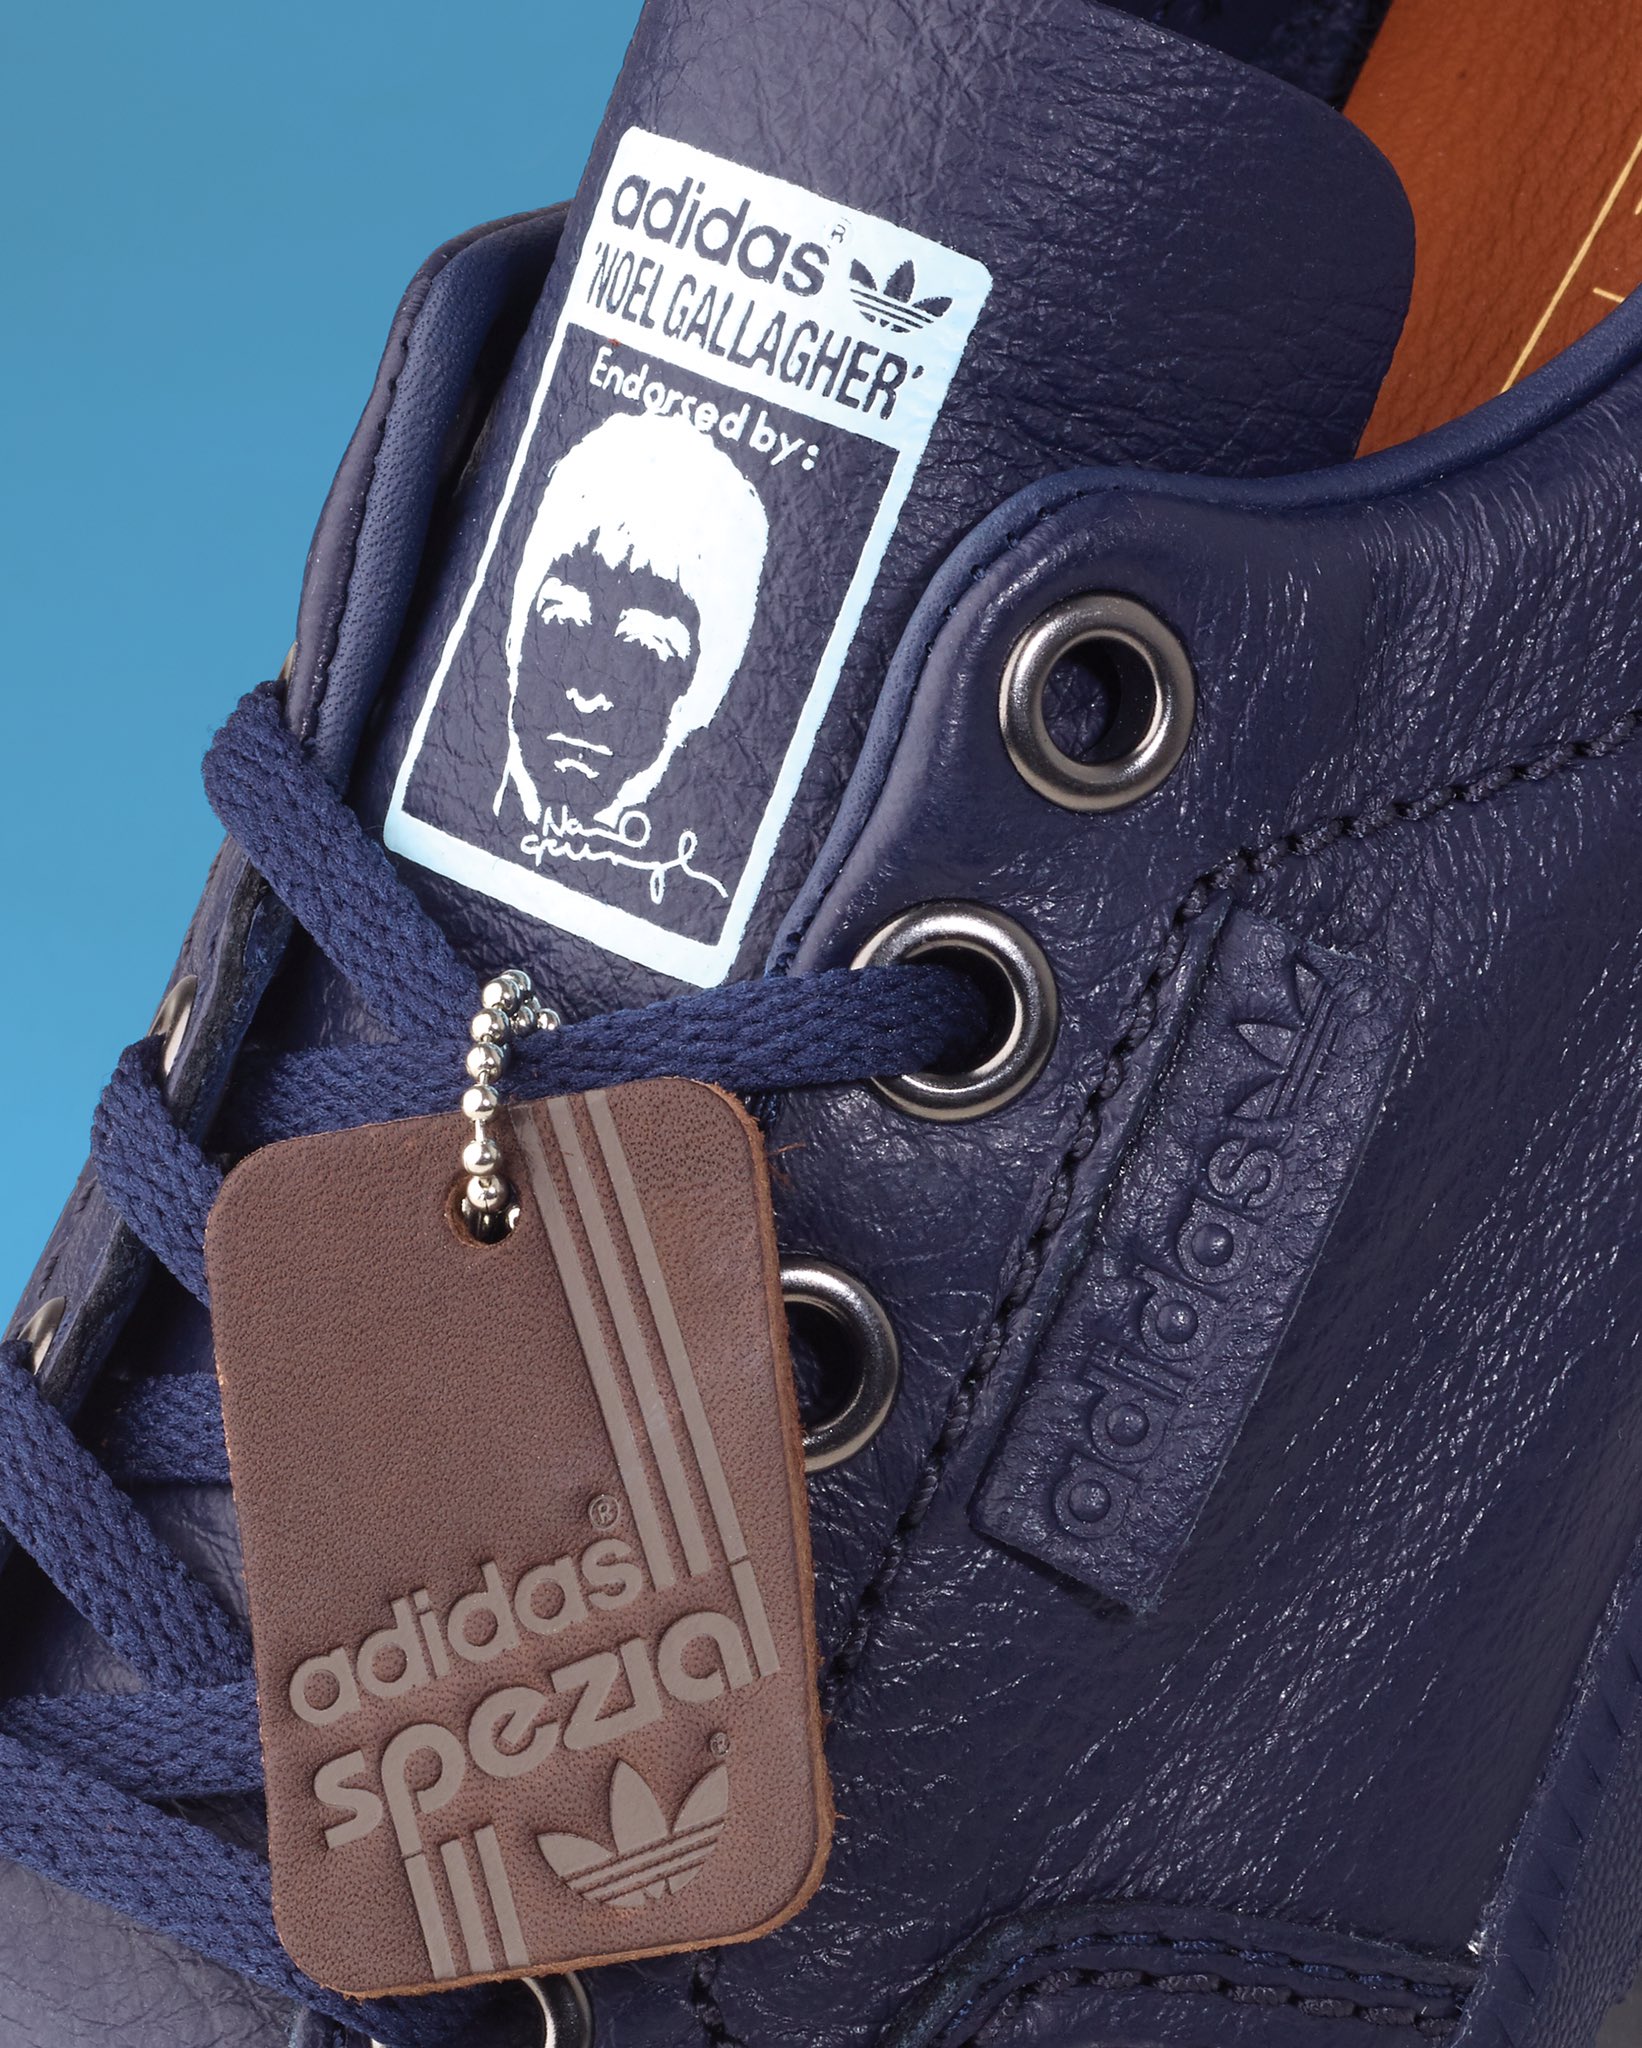 legislation exposition teens adidas Originals on Twitter: ".@NoelGallagher Garwen SPZL from adidas  Spezial SS17. A limited edition run out today online and at select  retailers. https://t.co/ZqDapGhCtl" / Twitter